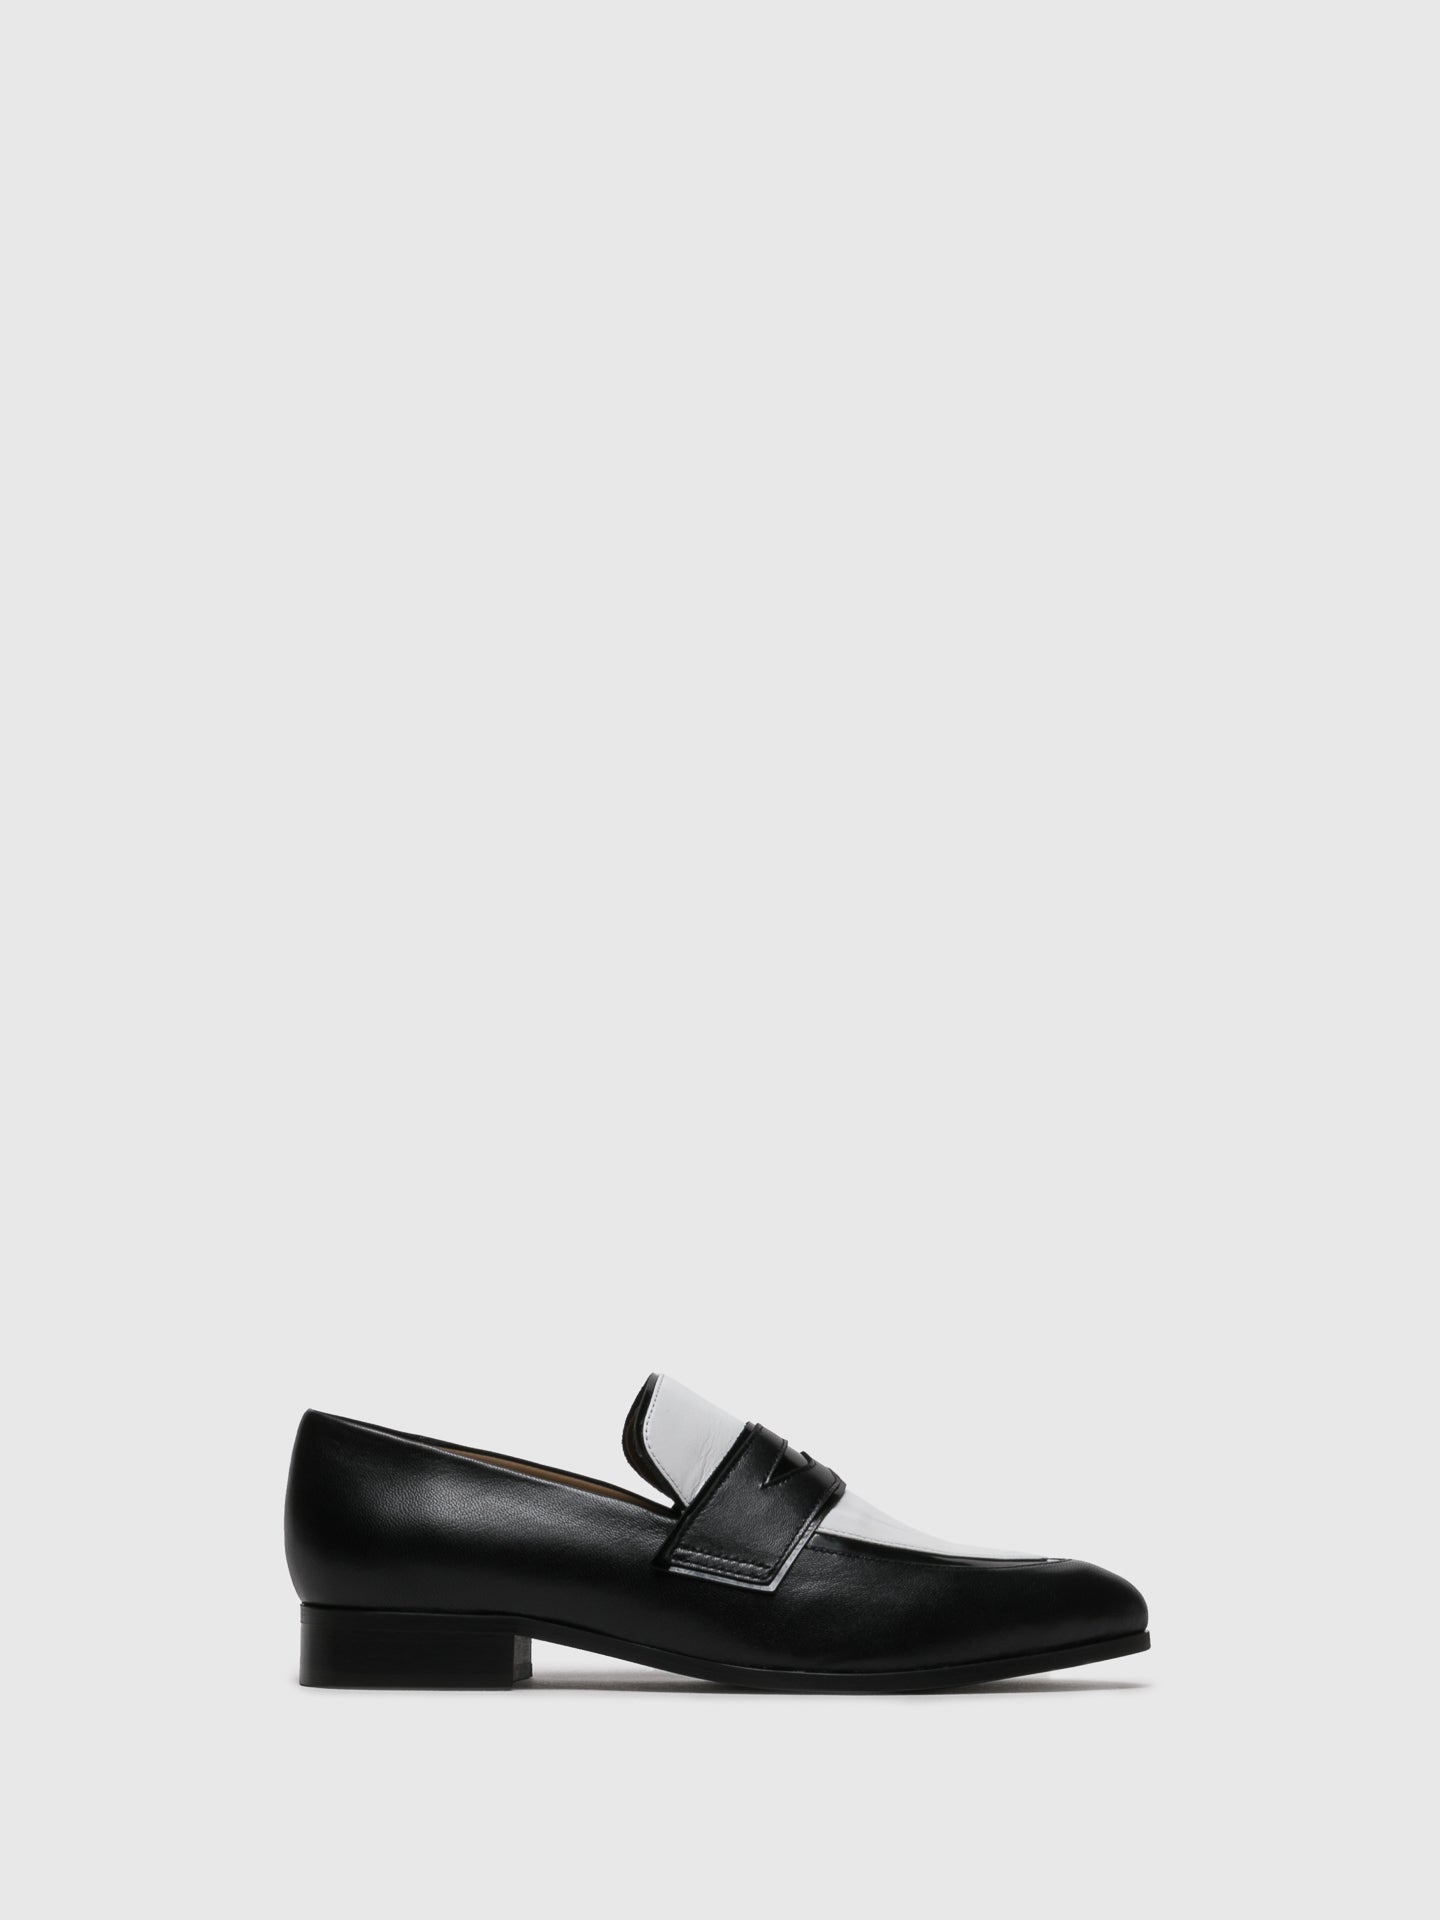 JJ Heitor Black White Pointed Toe Loafers